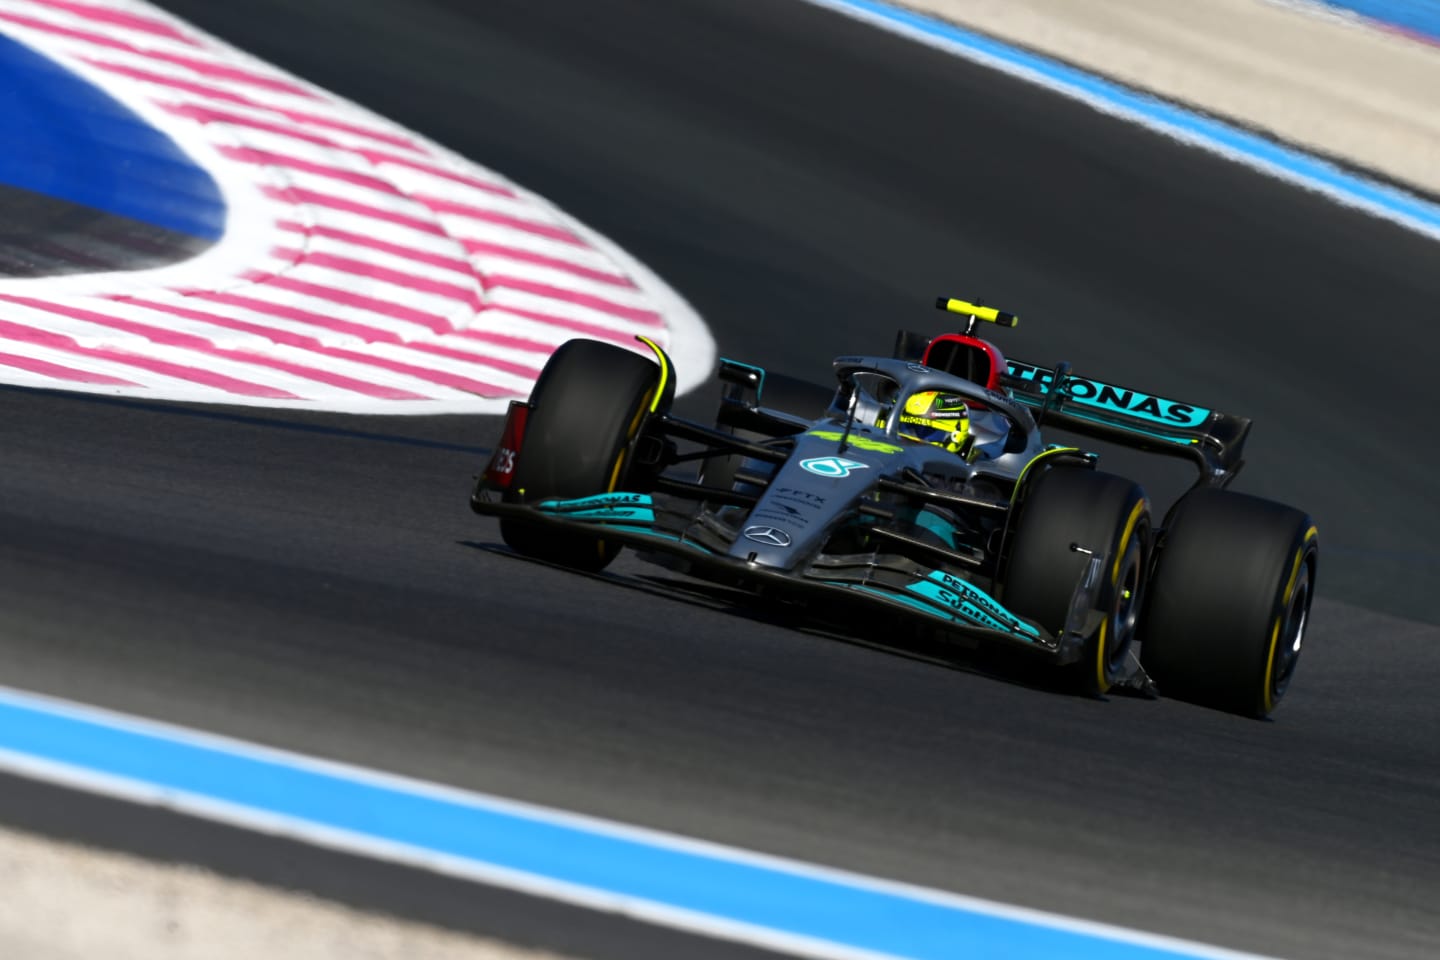 LE CASTELLET, FRANCE - JULY 22: Lewis Hamilton of Great Britain driving the (44) Mercedes AMG Petronas F1 Team W13 on track during practice ahead of the F1 Grand Prix of France at Circuit Paul Ricard on July 22, 2022 in Le Castellet, France. (Photo by Dan Mullan/Getty Images)